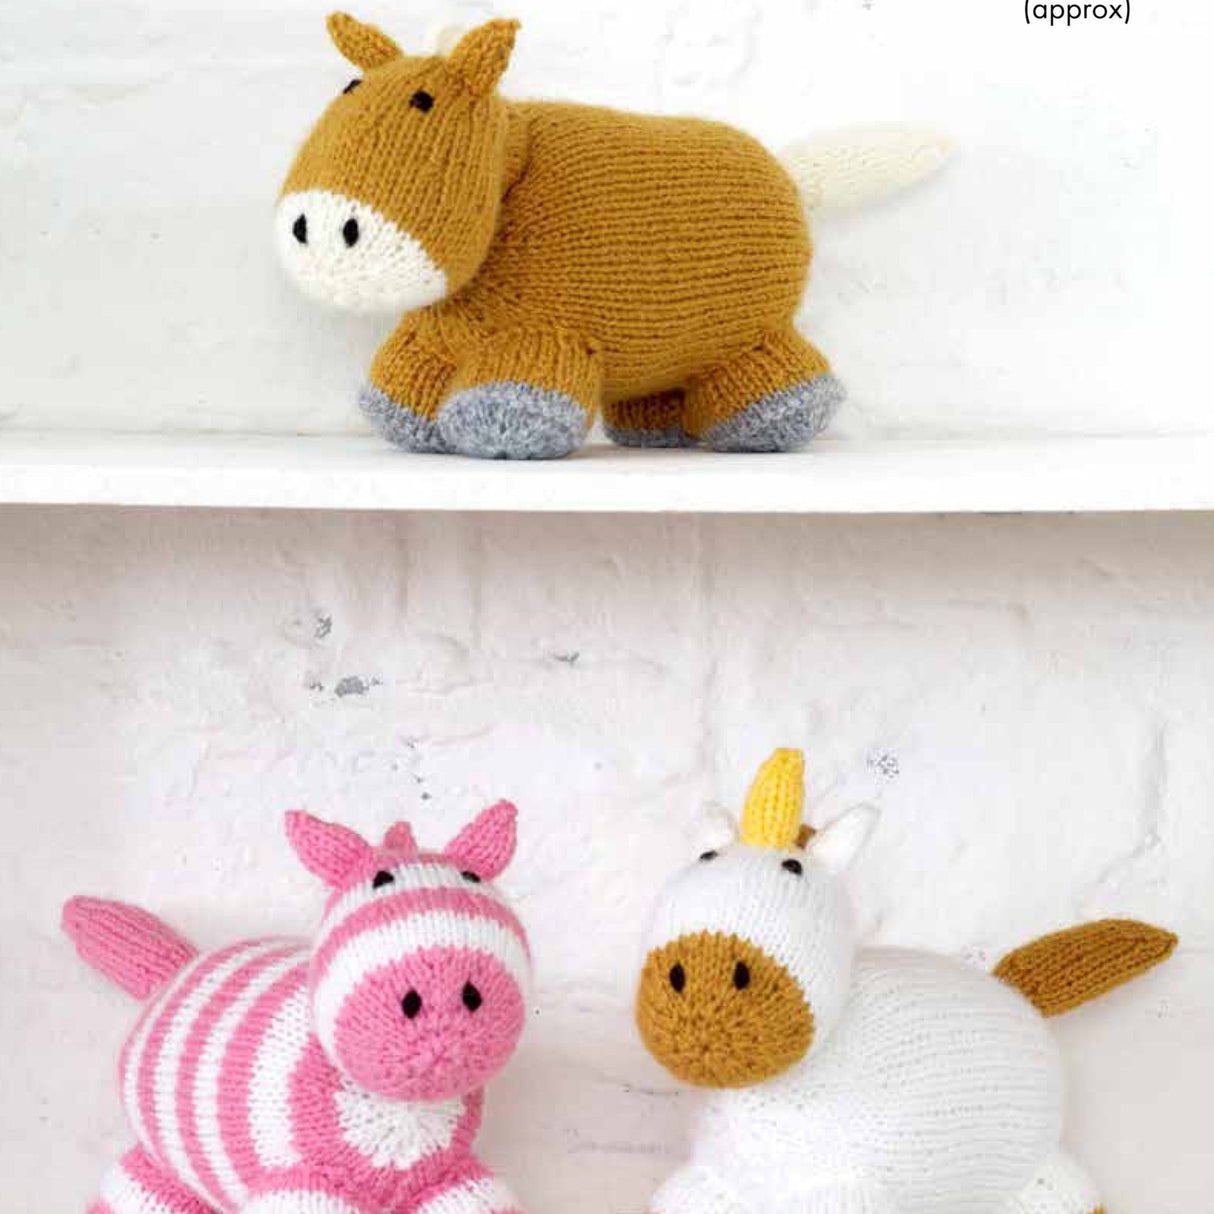 King Cole Patterns King Cole Toy Knitting Pattern 9103